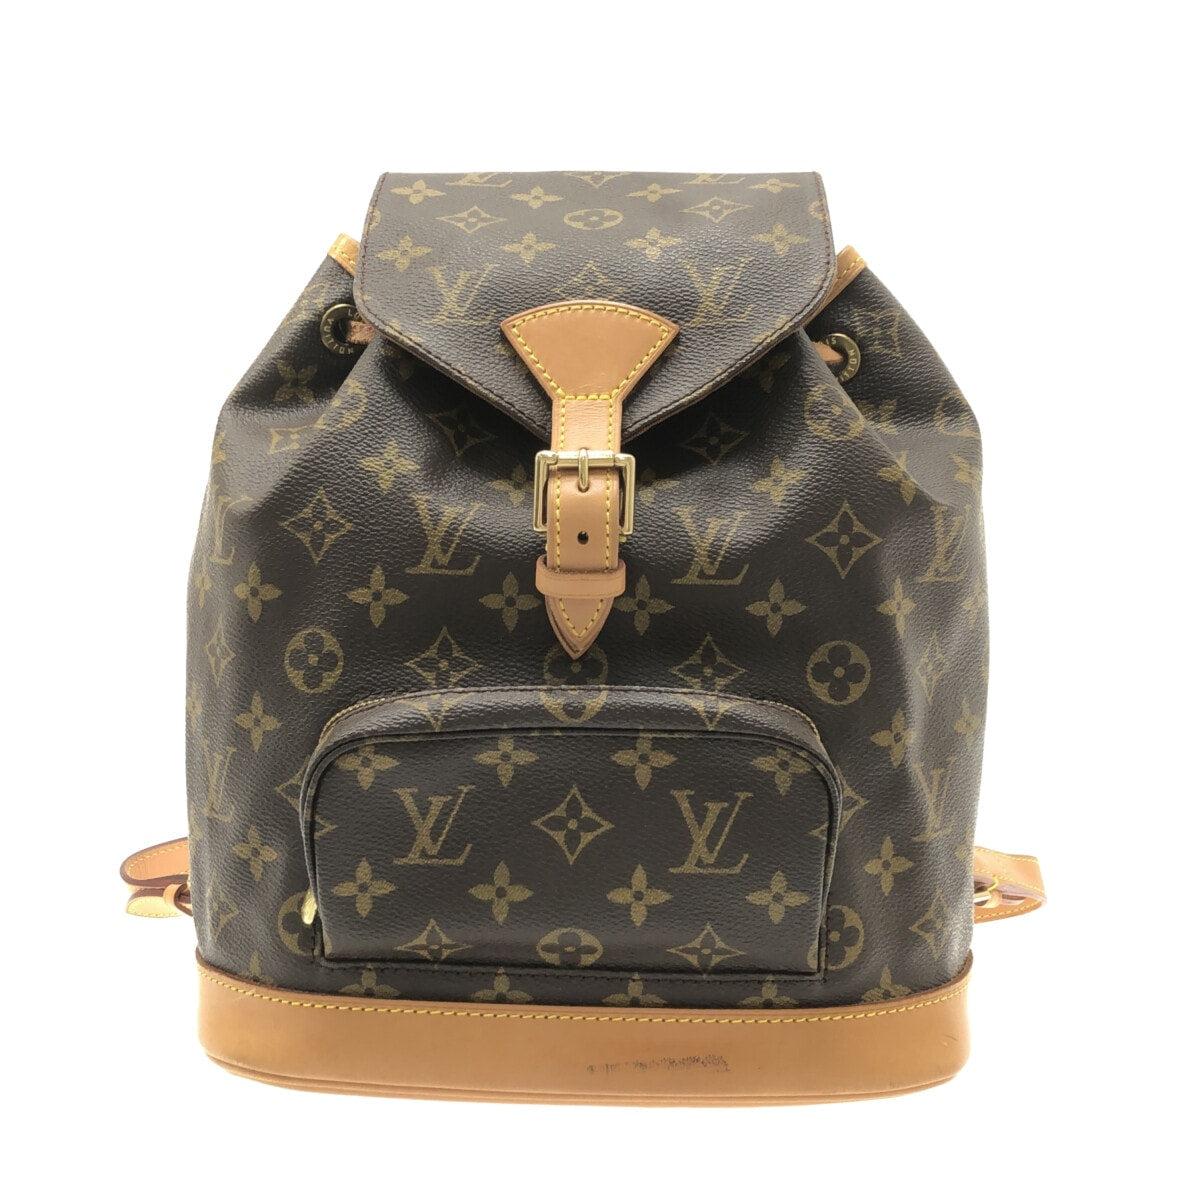 Louis Vuitton Montsouris Mm Canvas Backpack Bag (pre-owned) in Gray